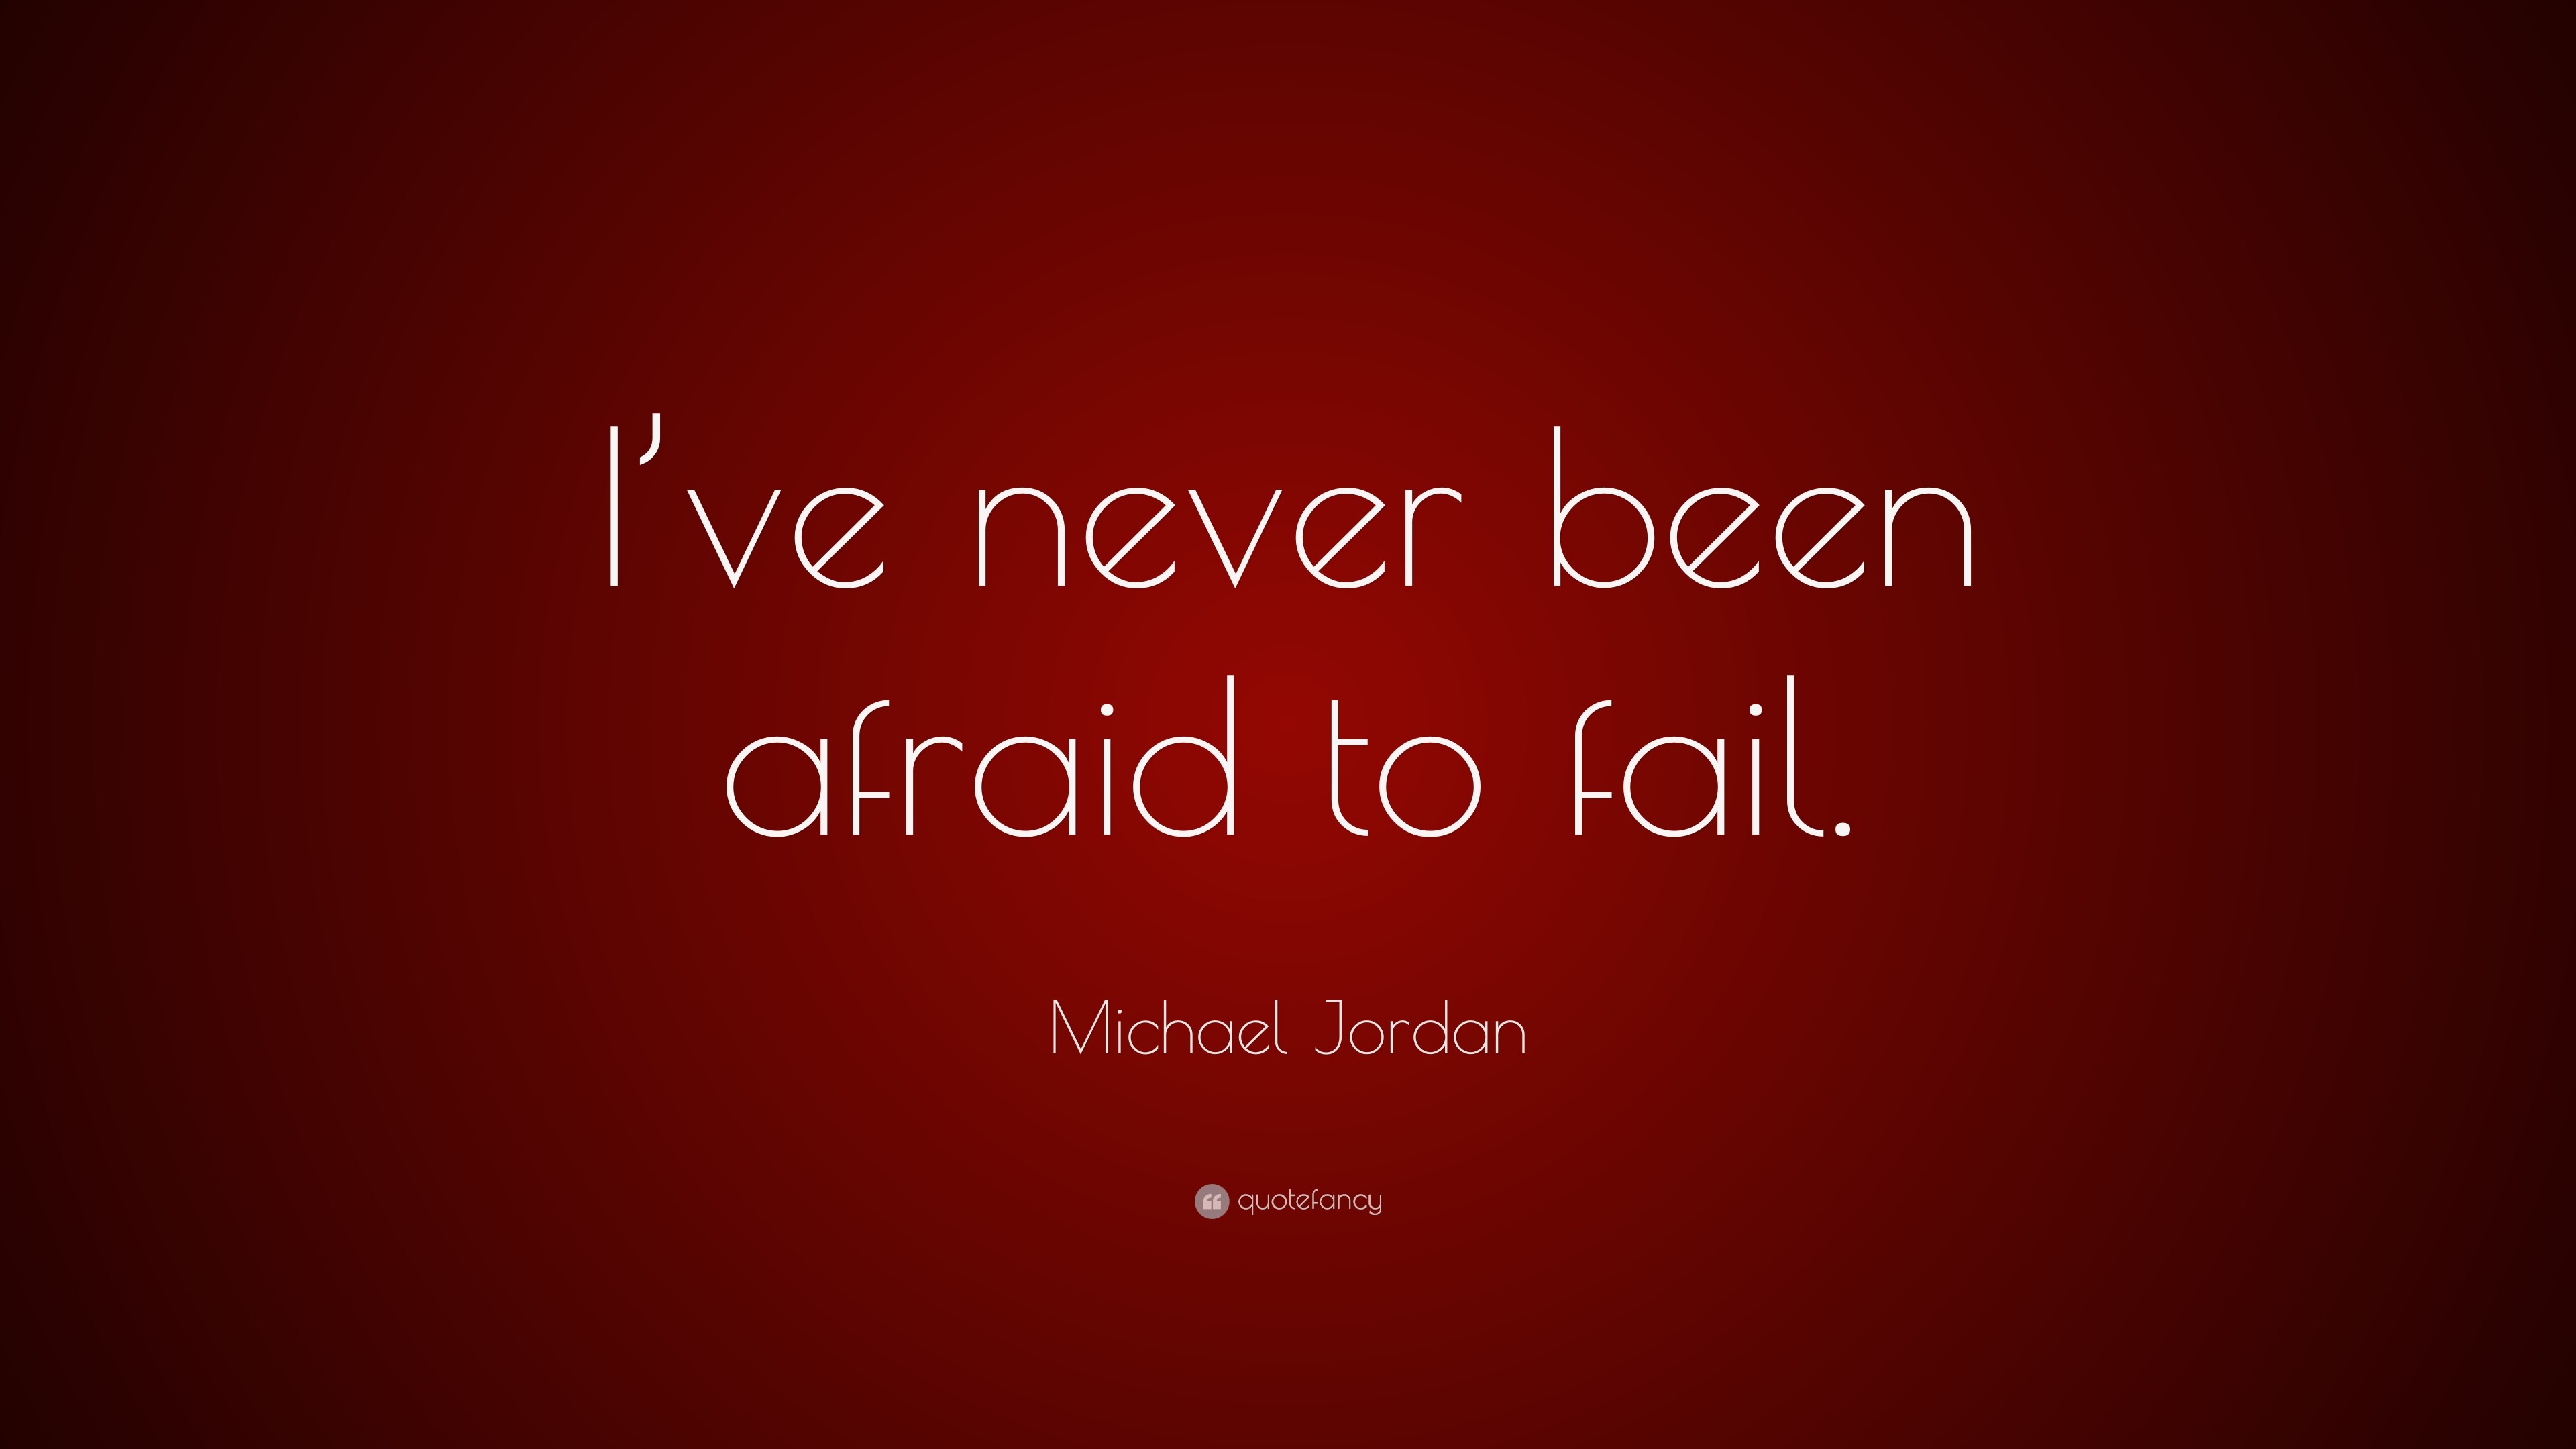 3840x2160 Michael Jordan Quote: “I've never been afraid to fail.”